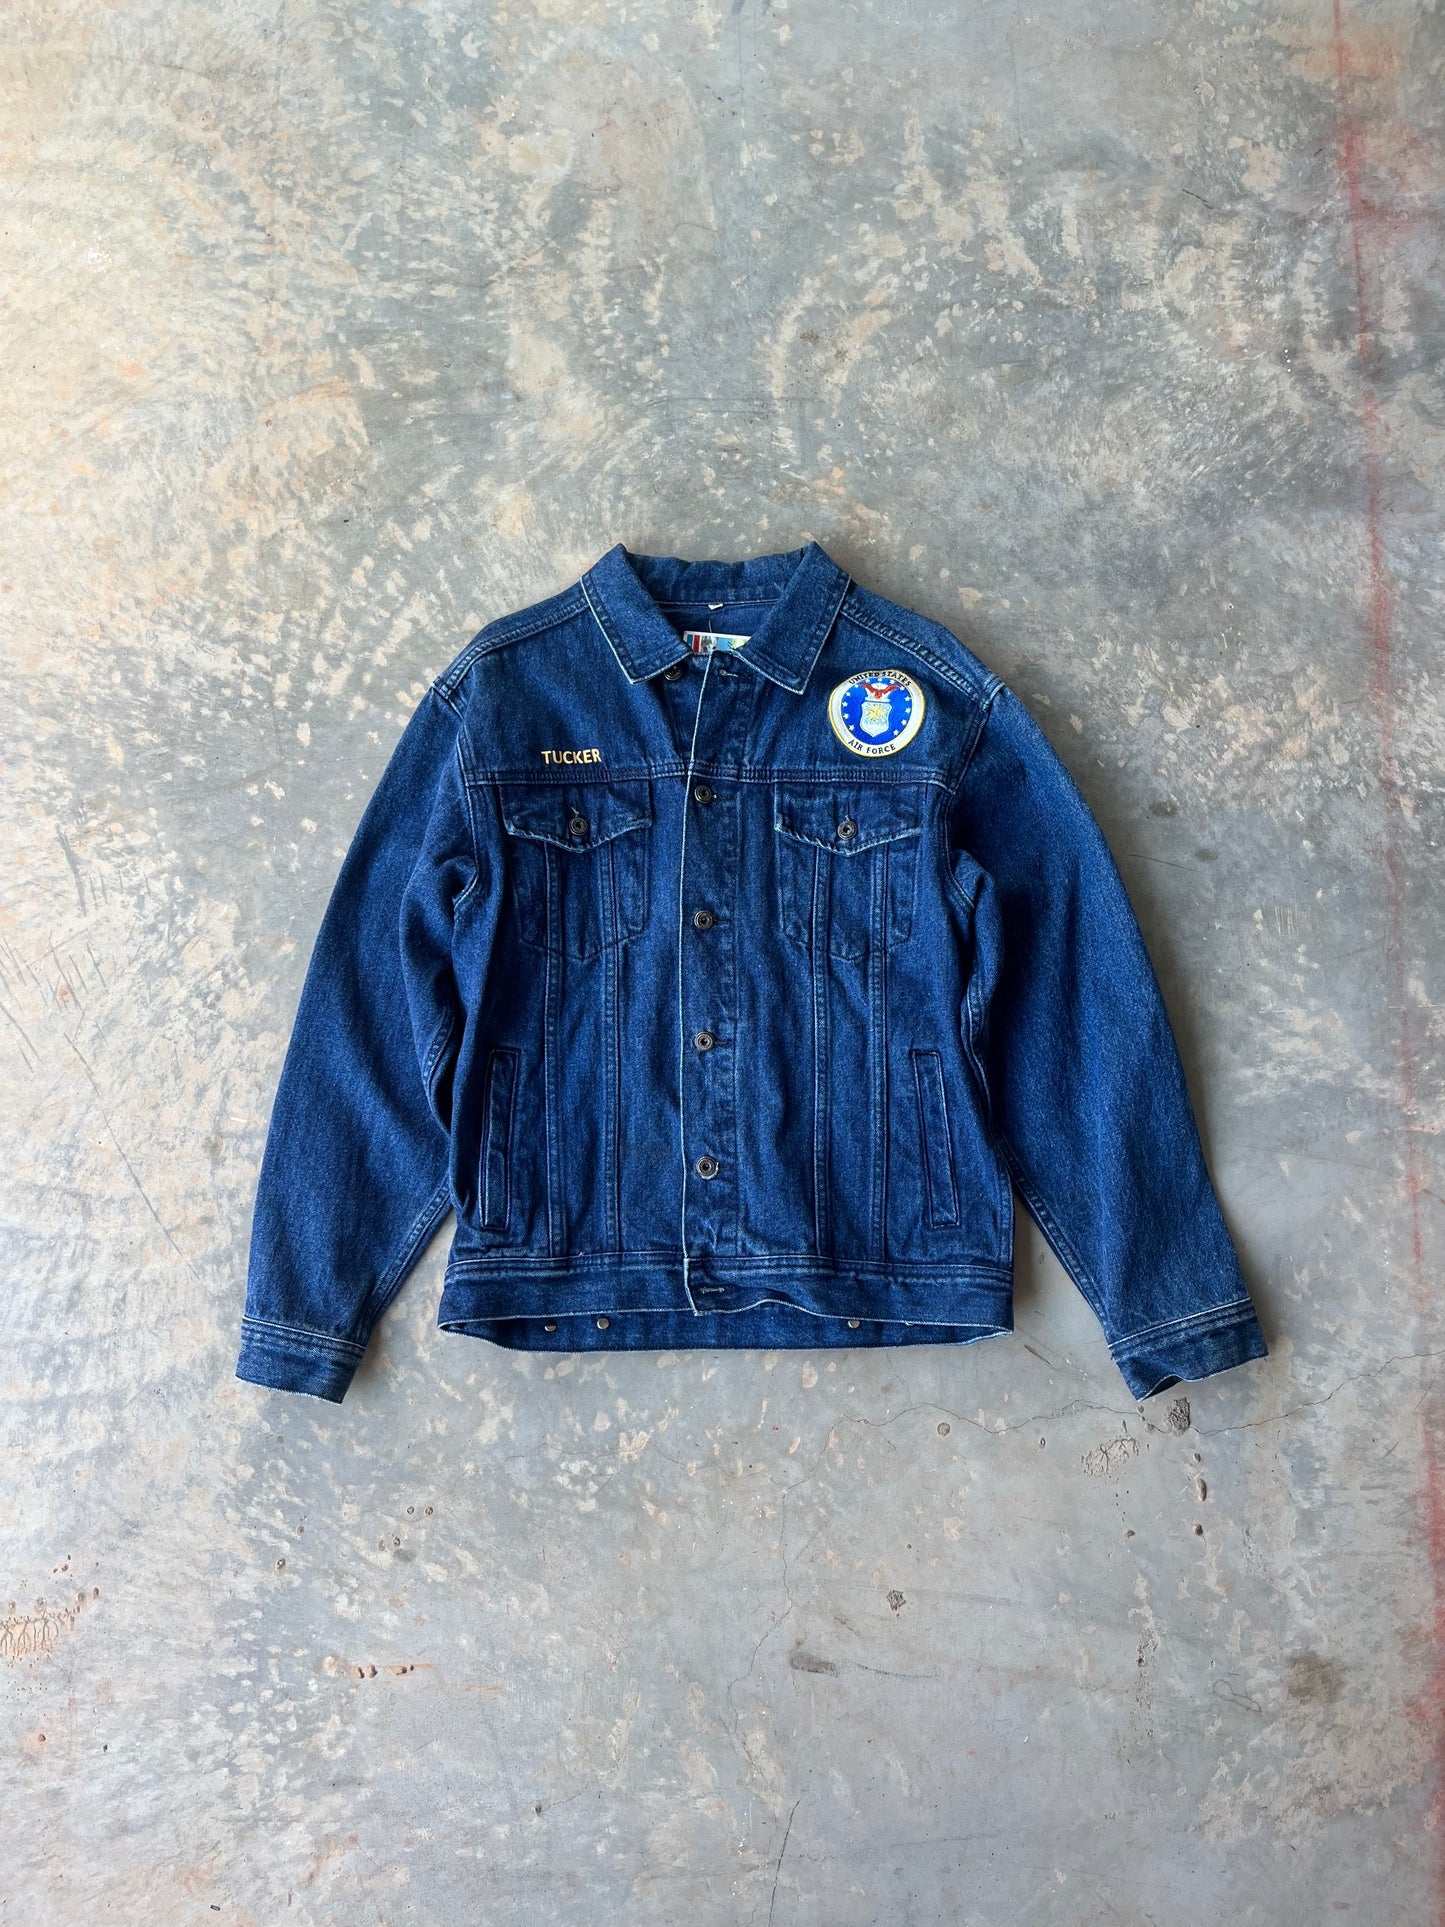 United States Air Force Jean Jacket